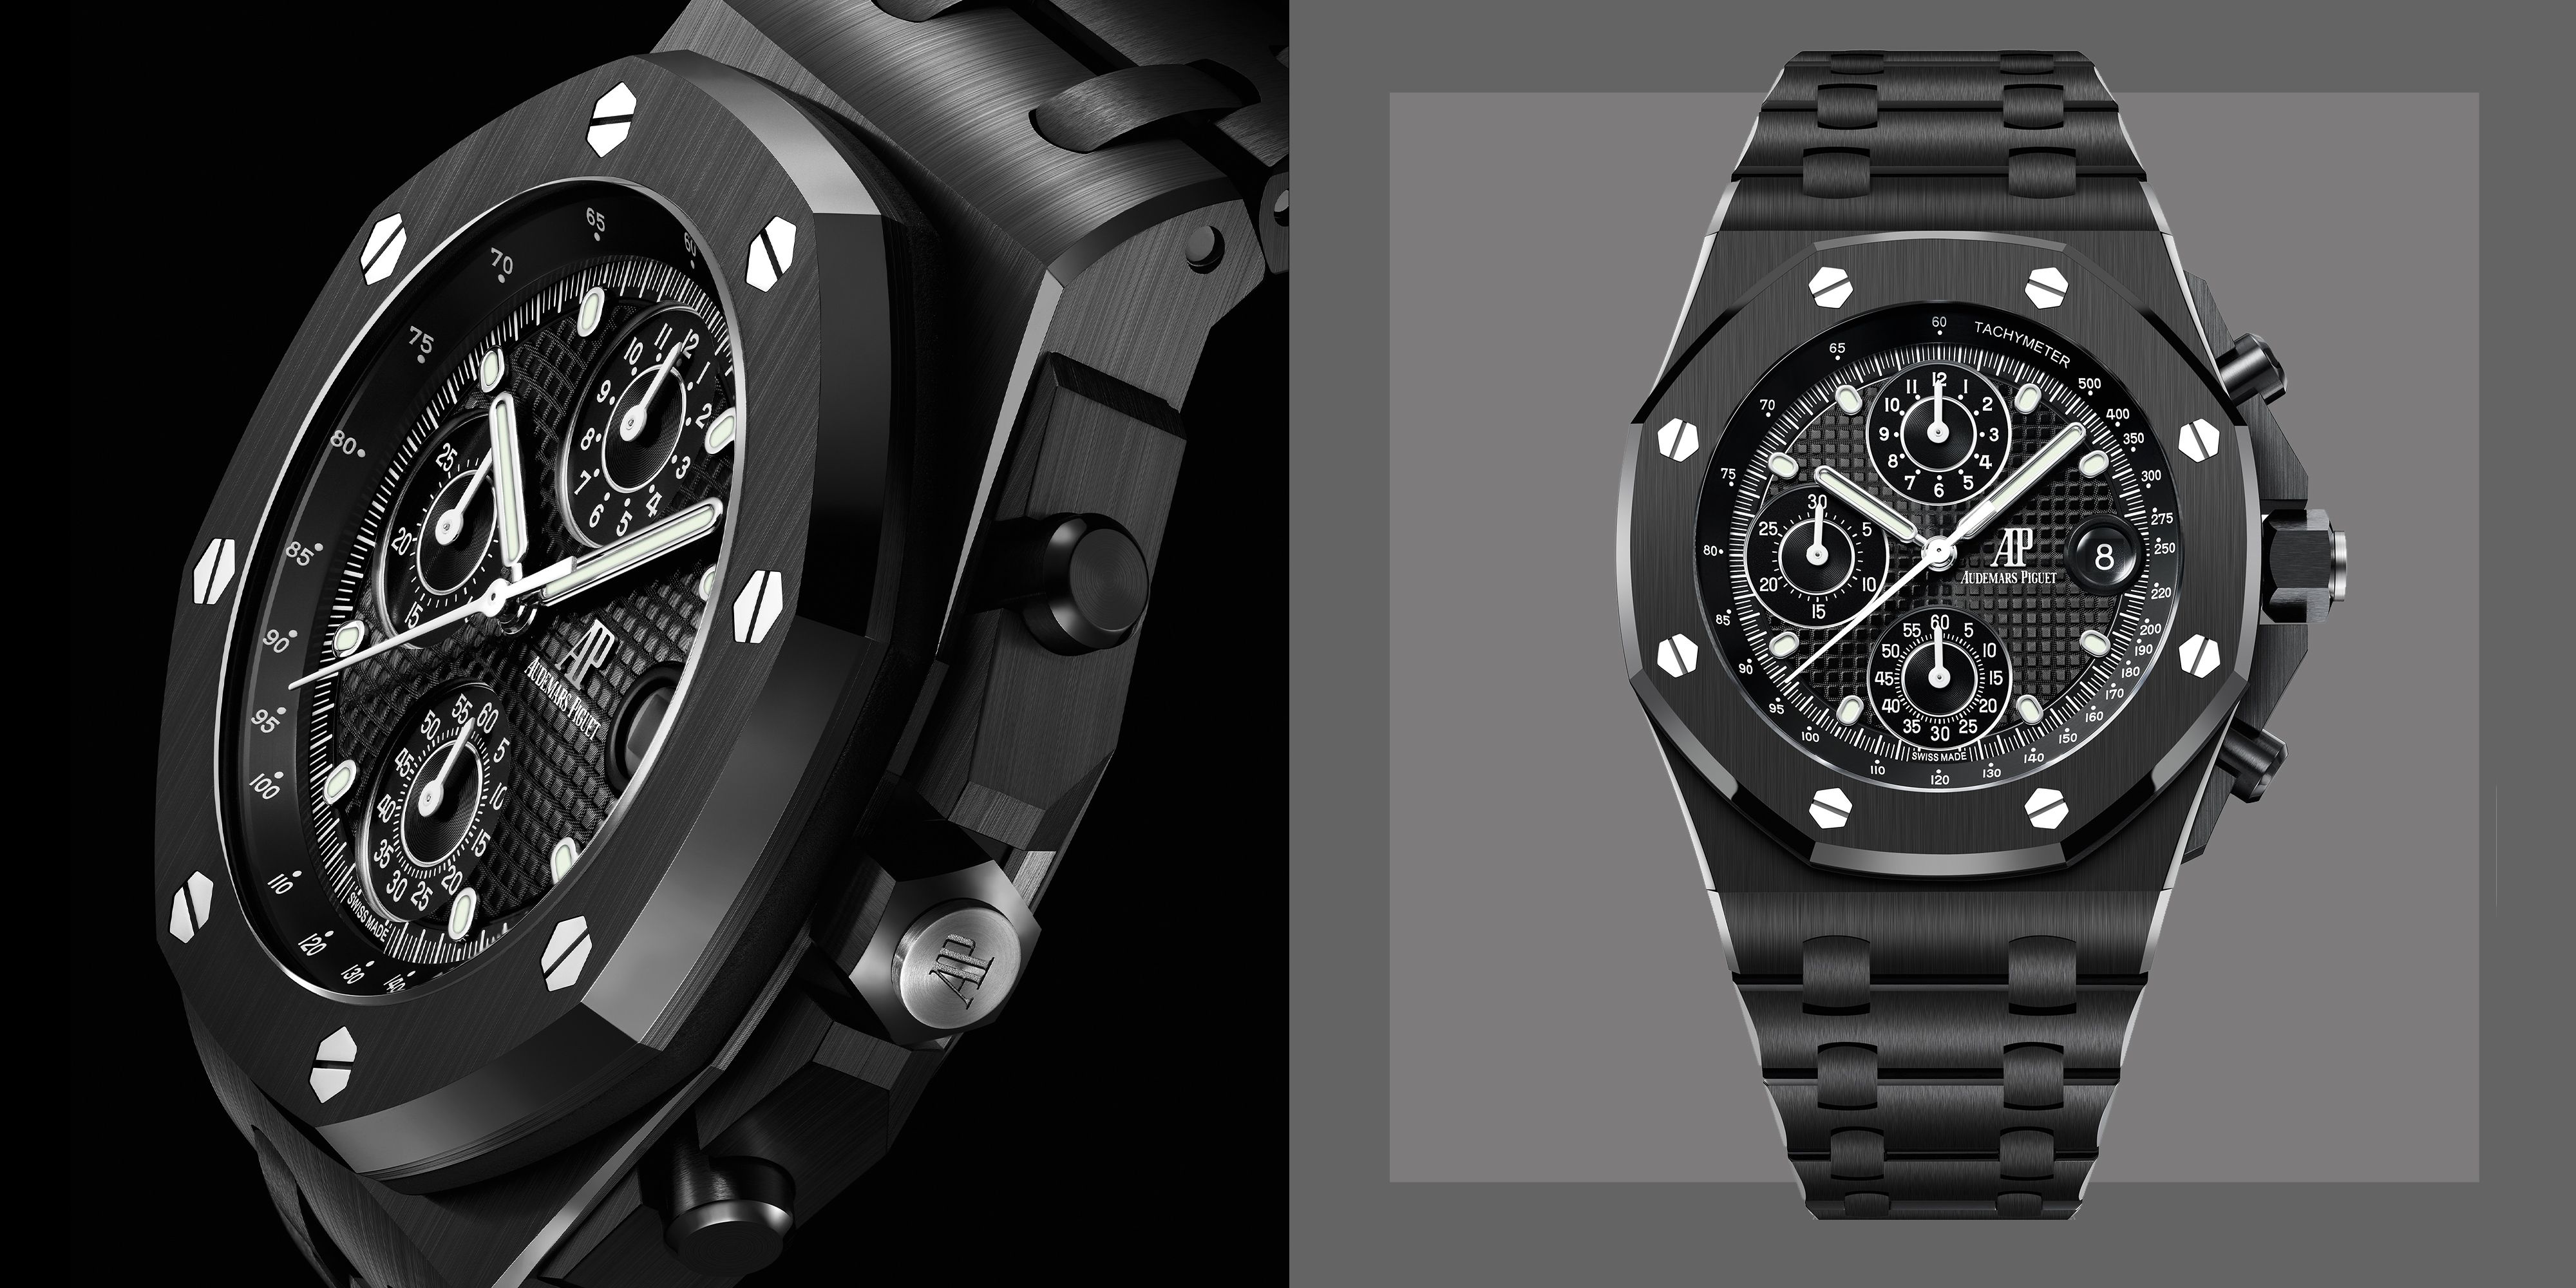 The Royal Oak Offshore celebrates its 30th Anniversary